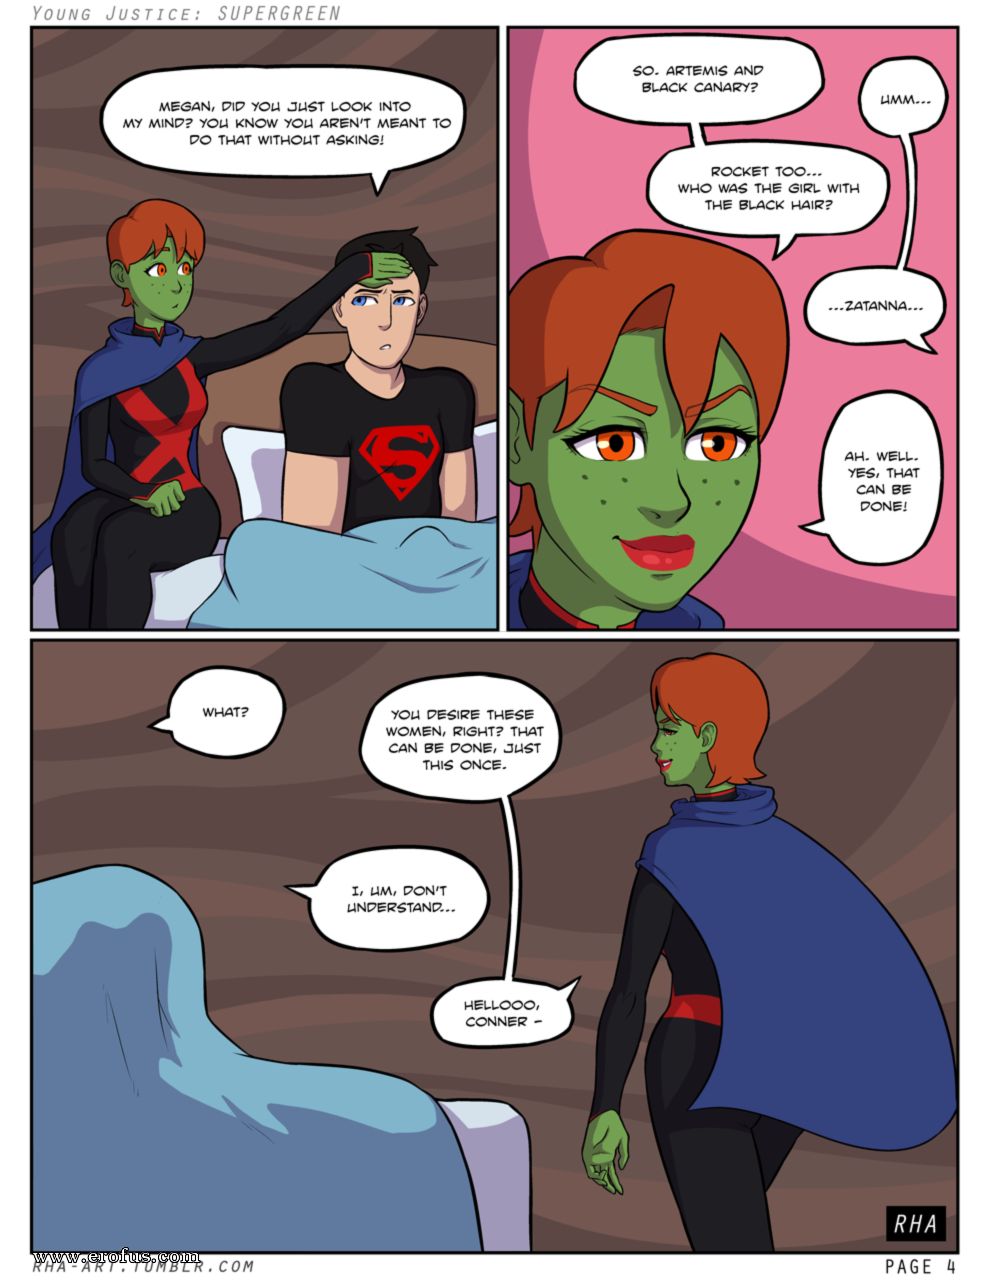 Young justice supergreen porn comic